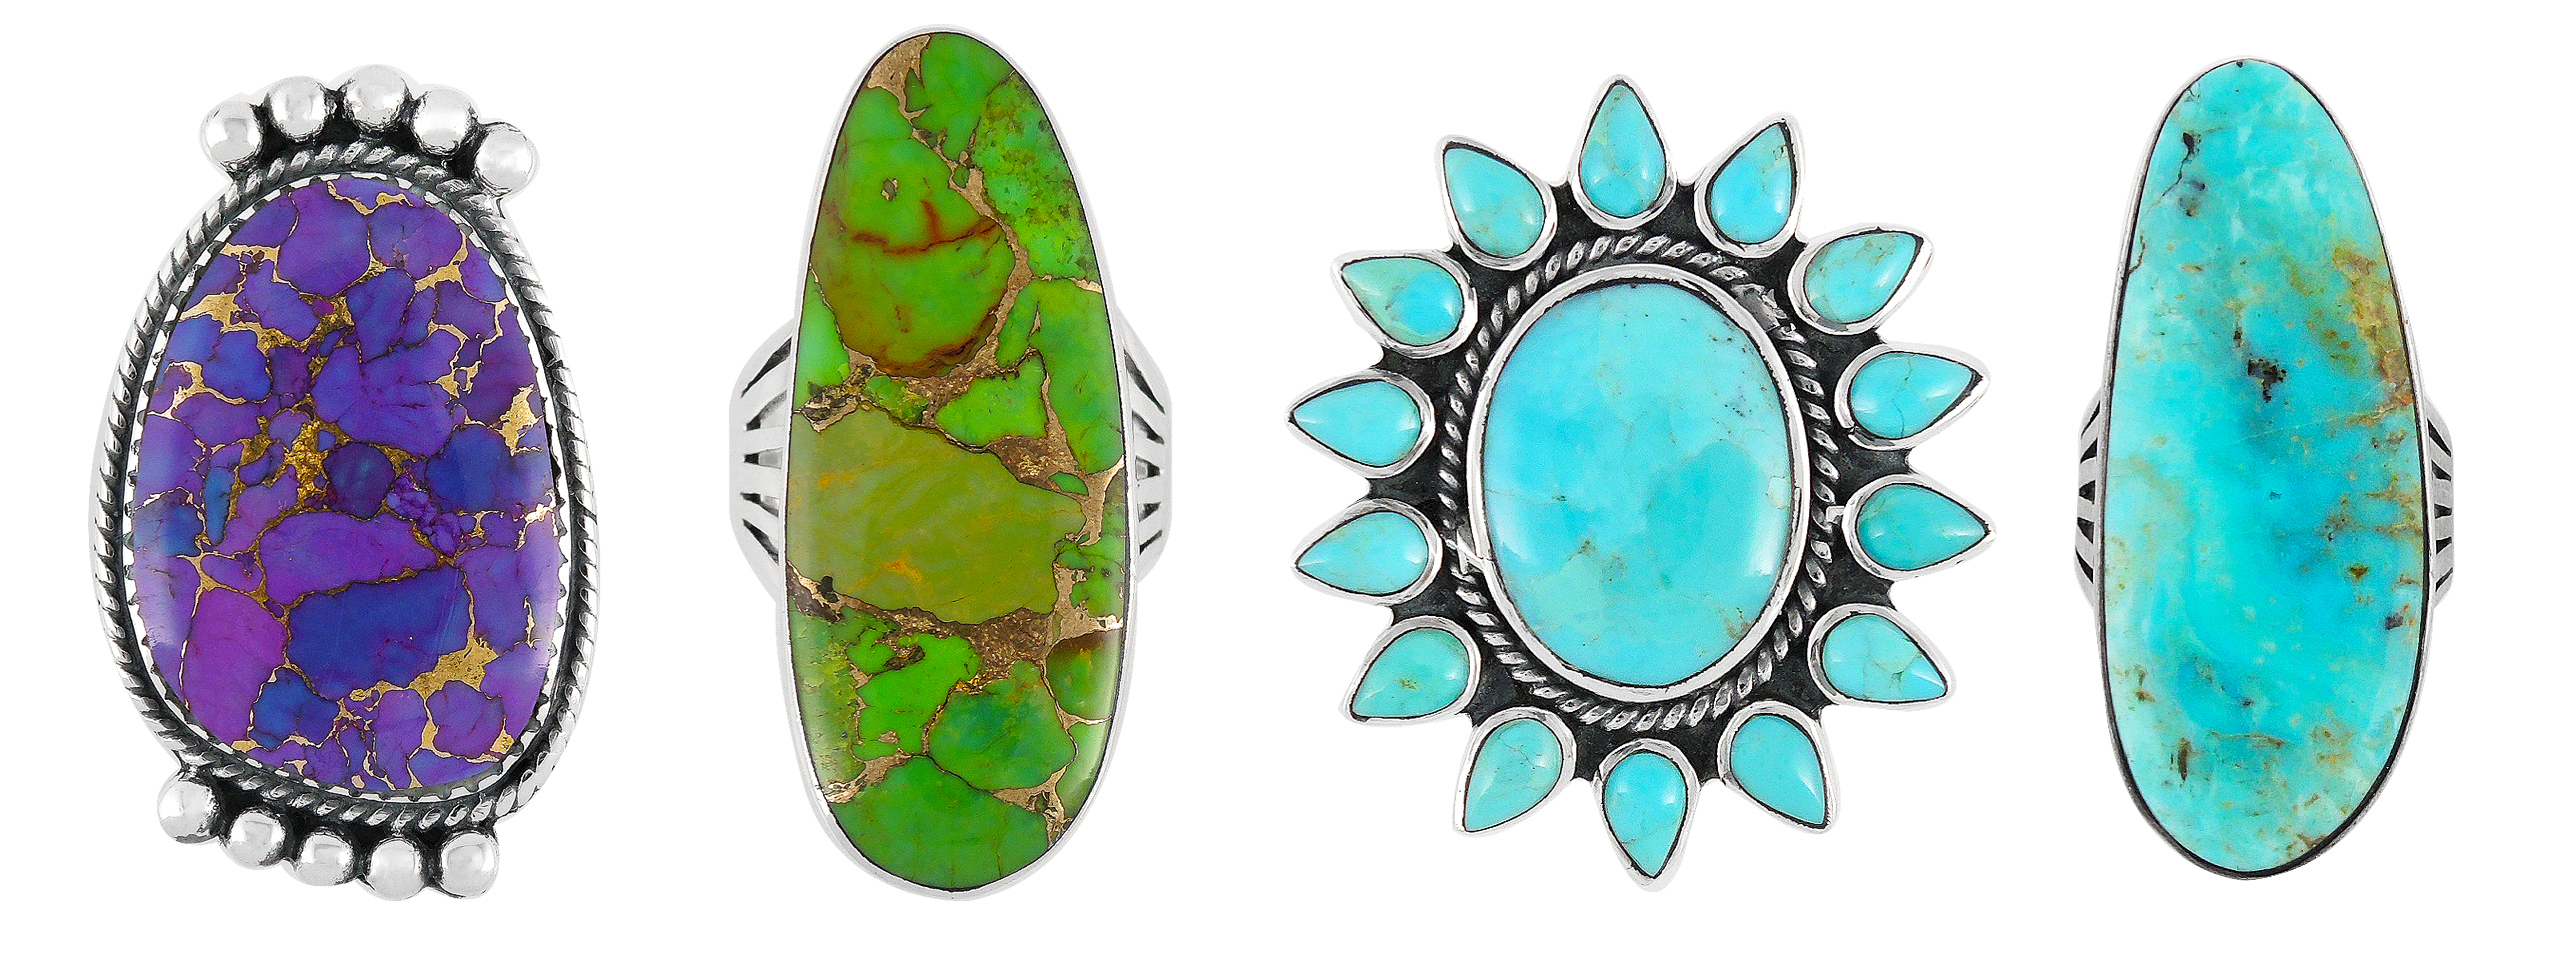 different types of turquoise stones